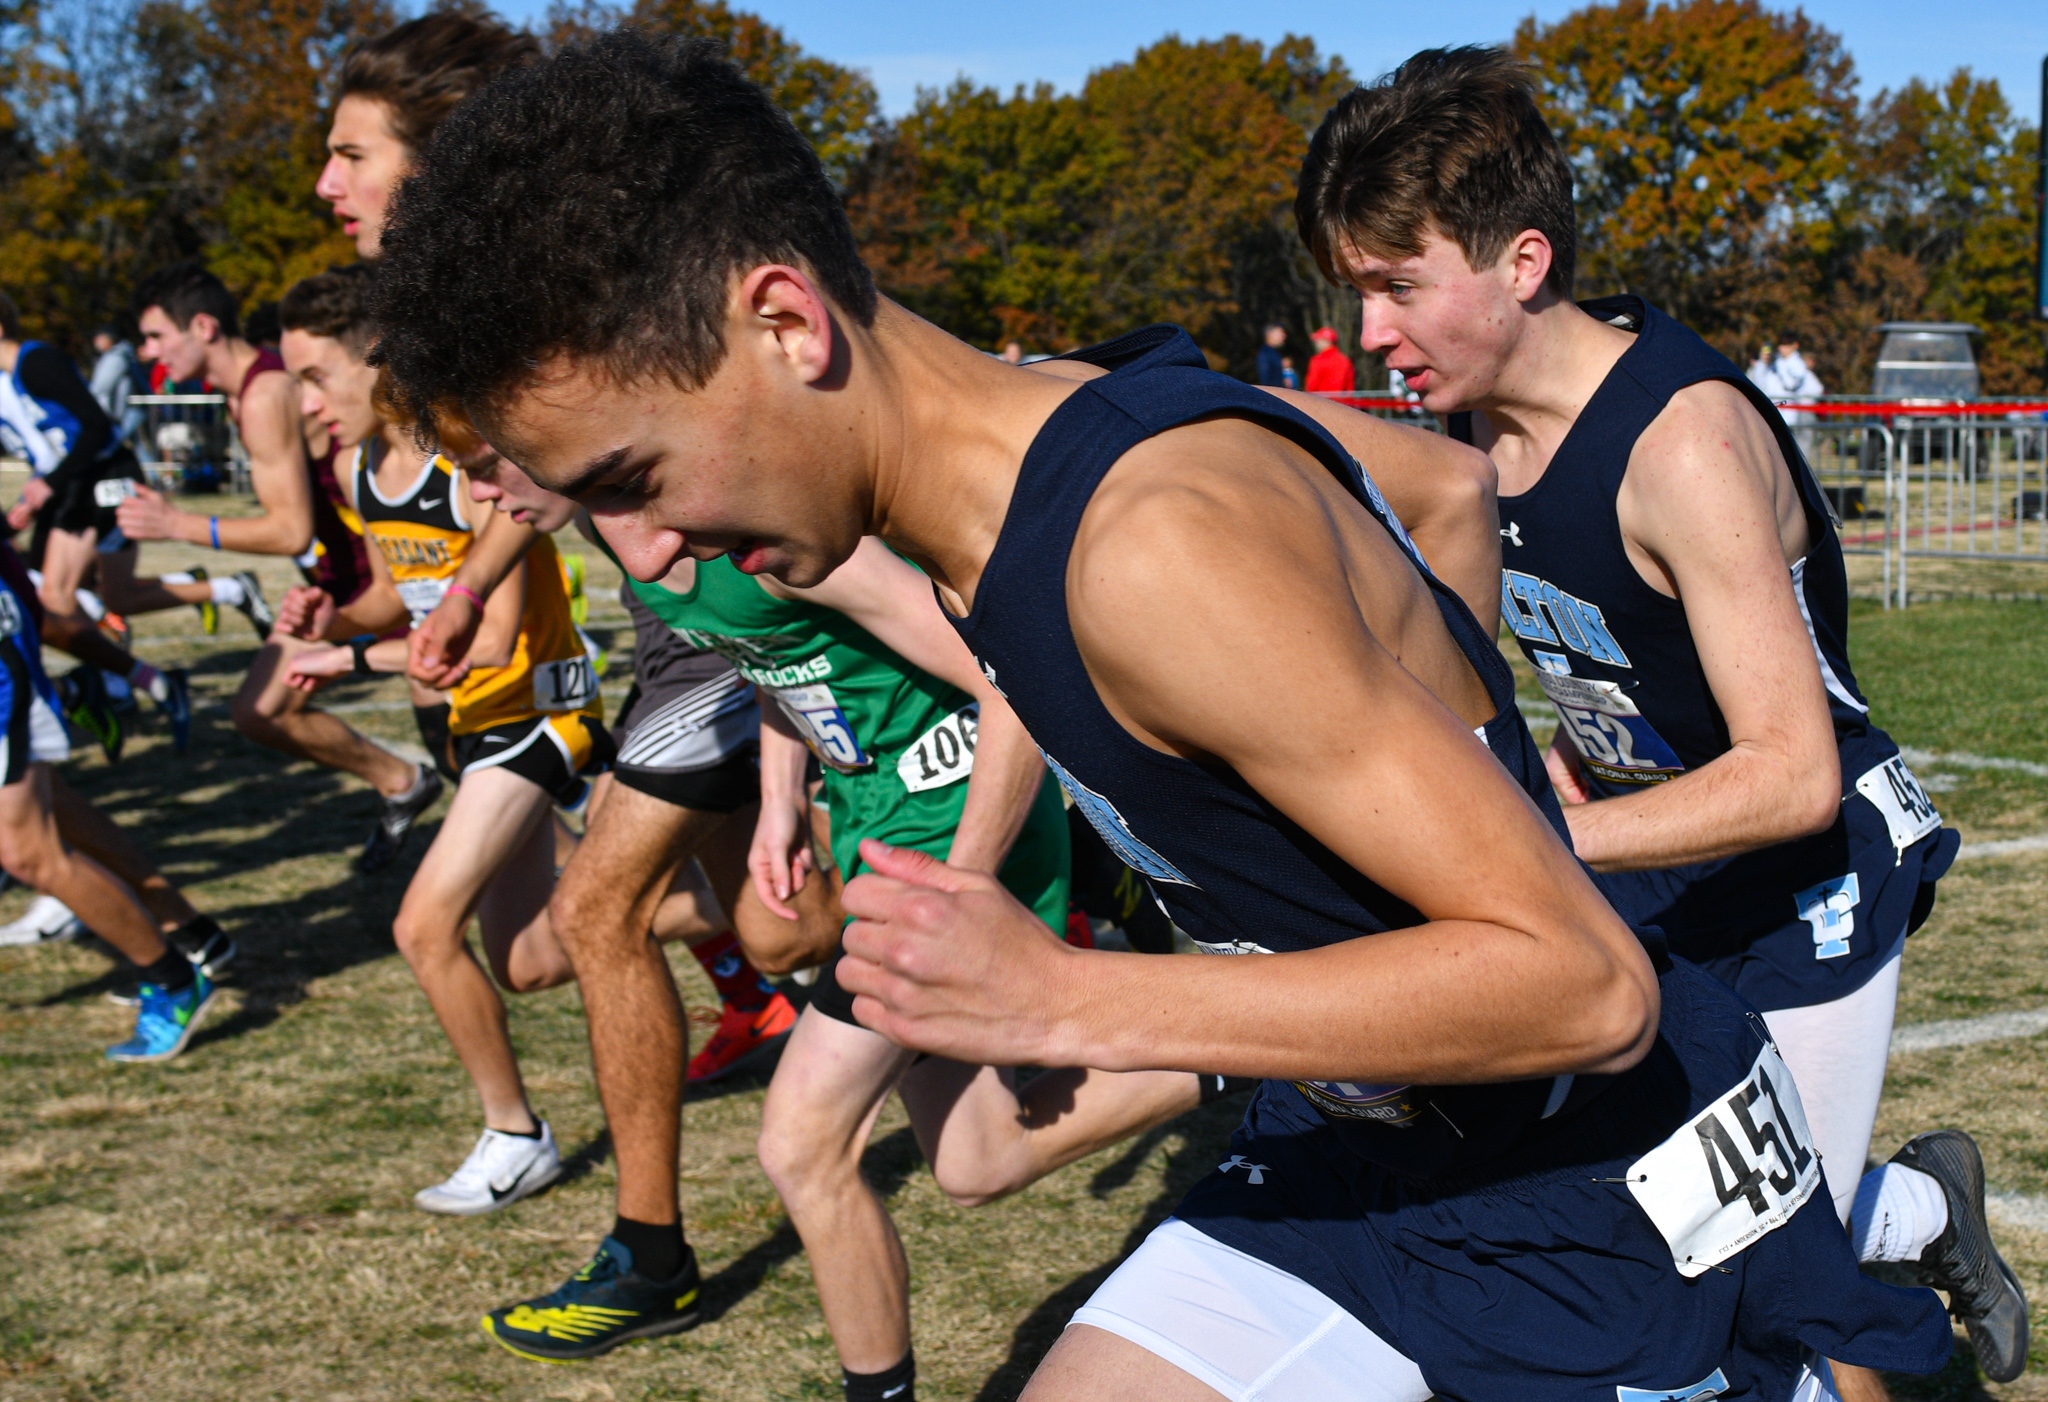 Stills - Tolton cross country runners Drew Freeman and Silas Glaude take off at the start of the cross country championship race.